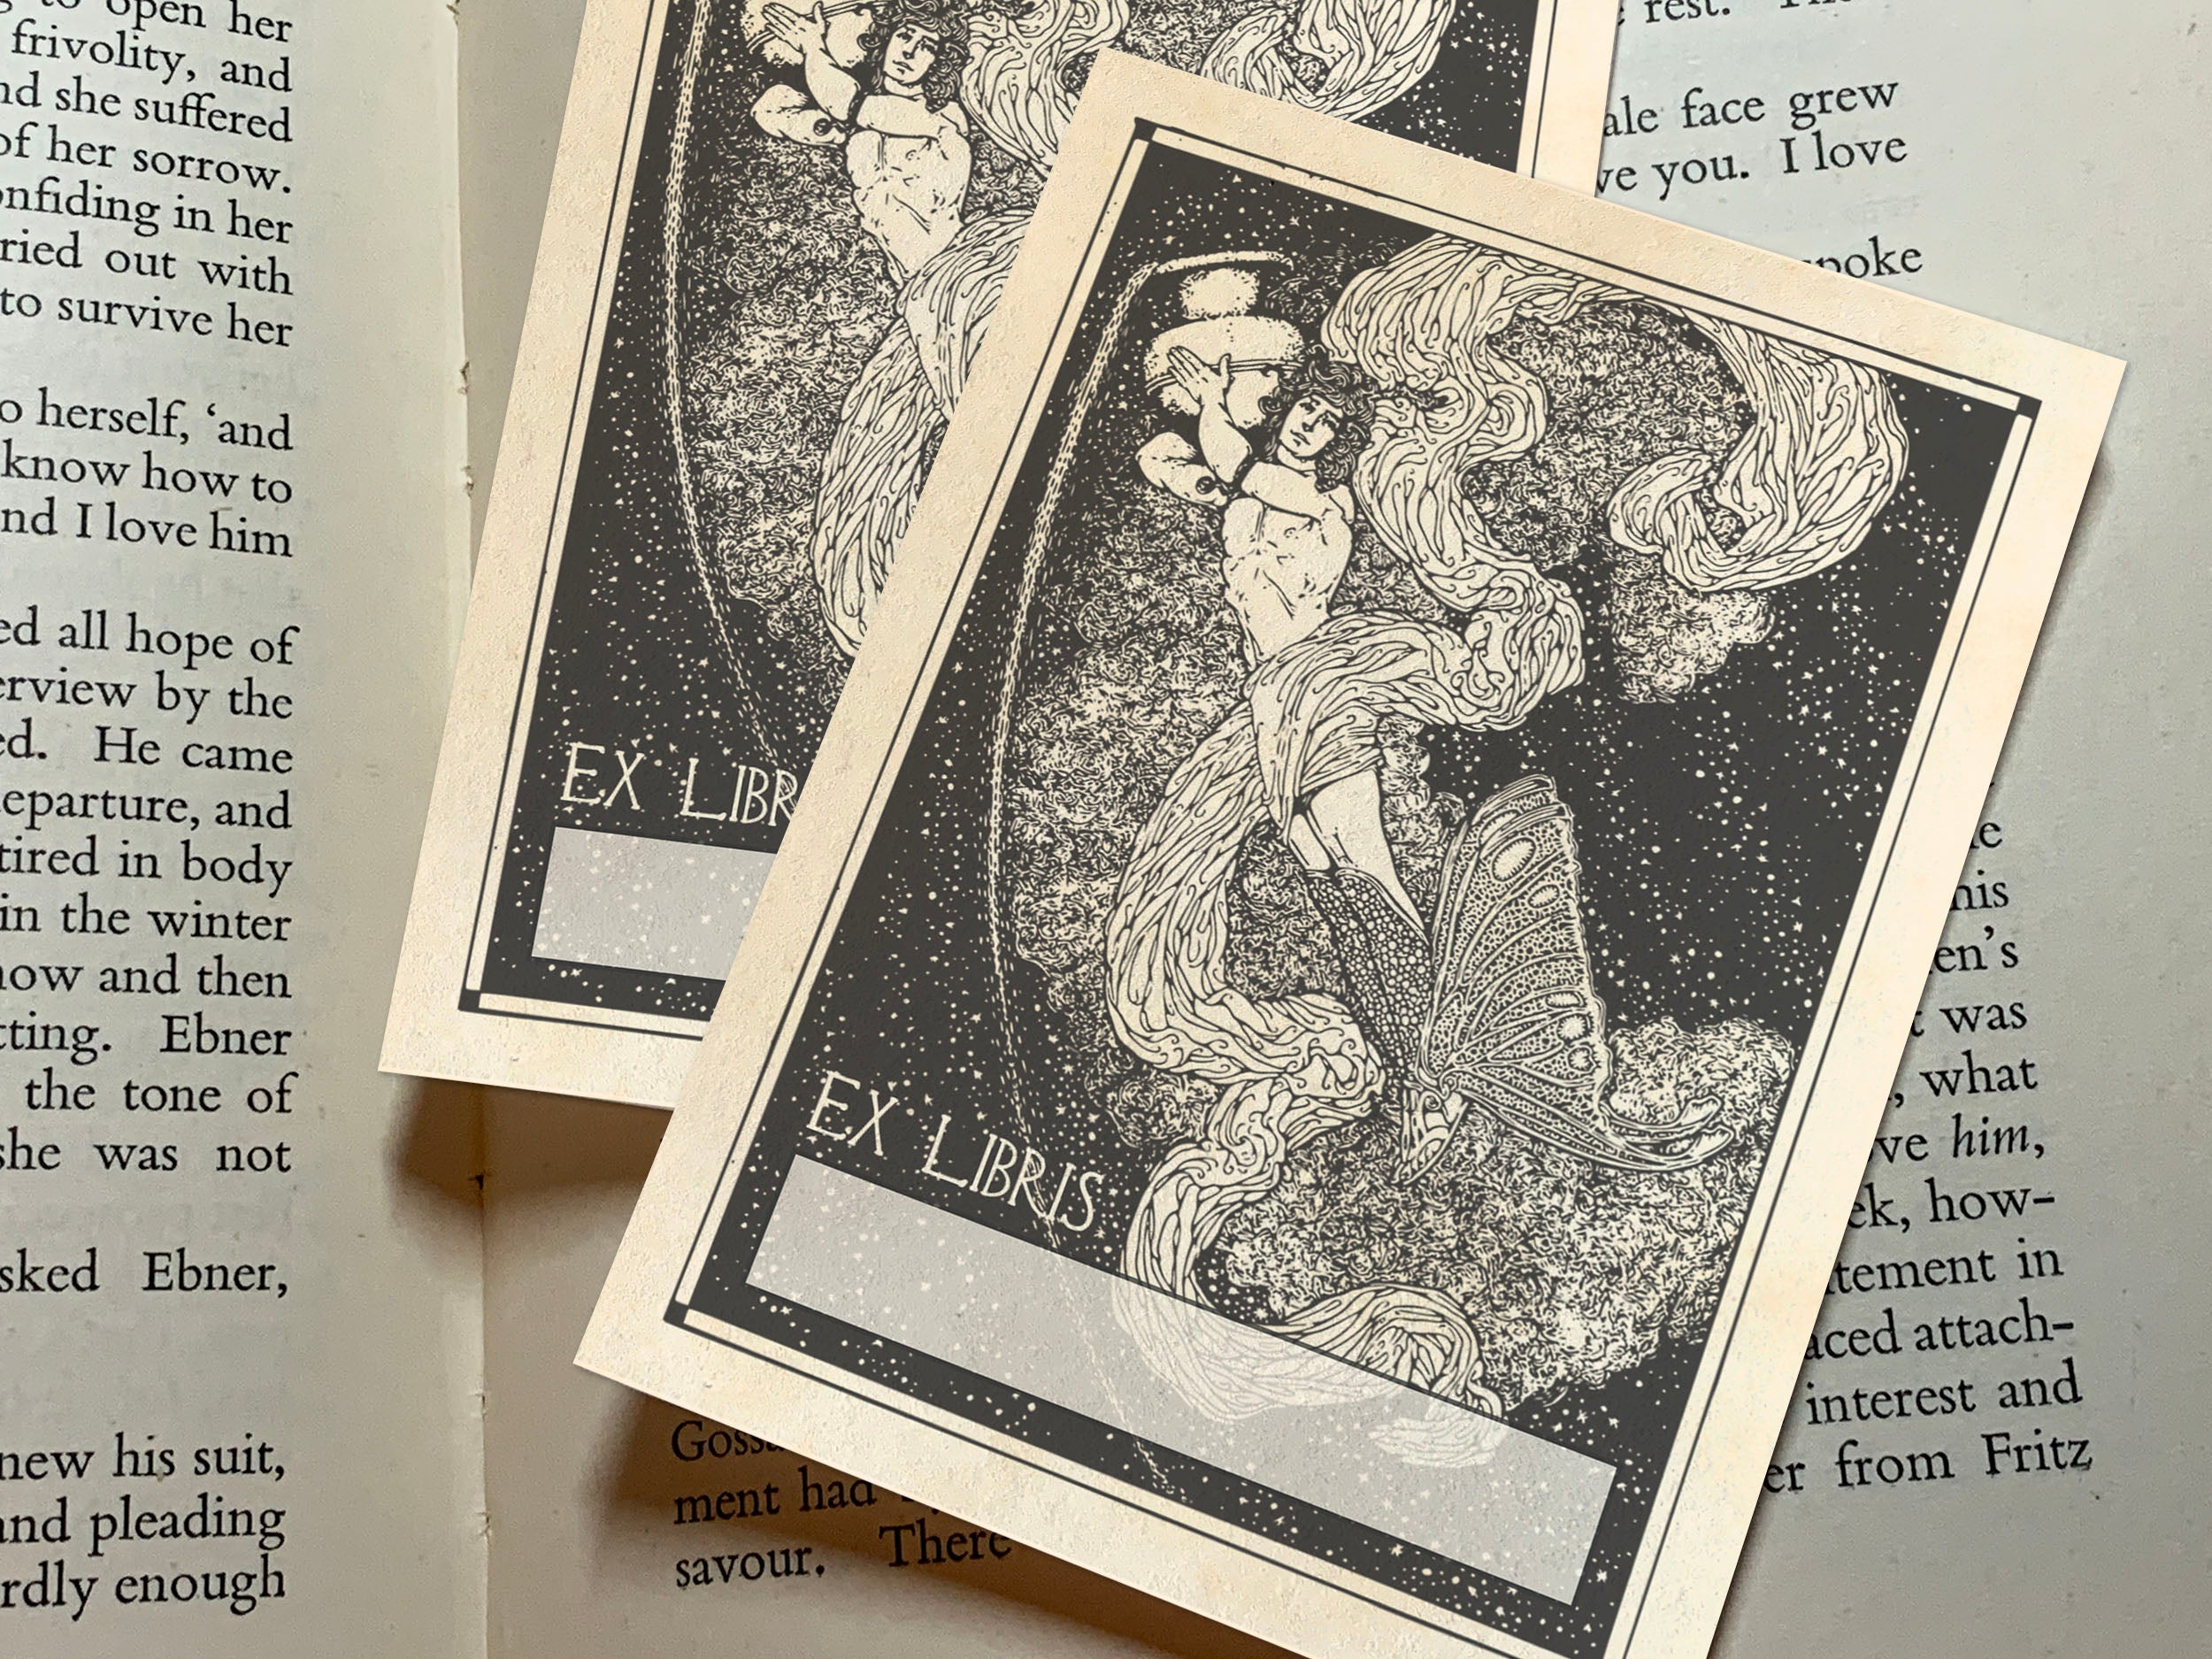 Age of Aquarius, Personalized Celestial Ex-Libris Bookplates, Crafted on Traditional Gummed Paper, 3in x 4in, Set of 30